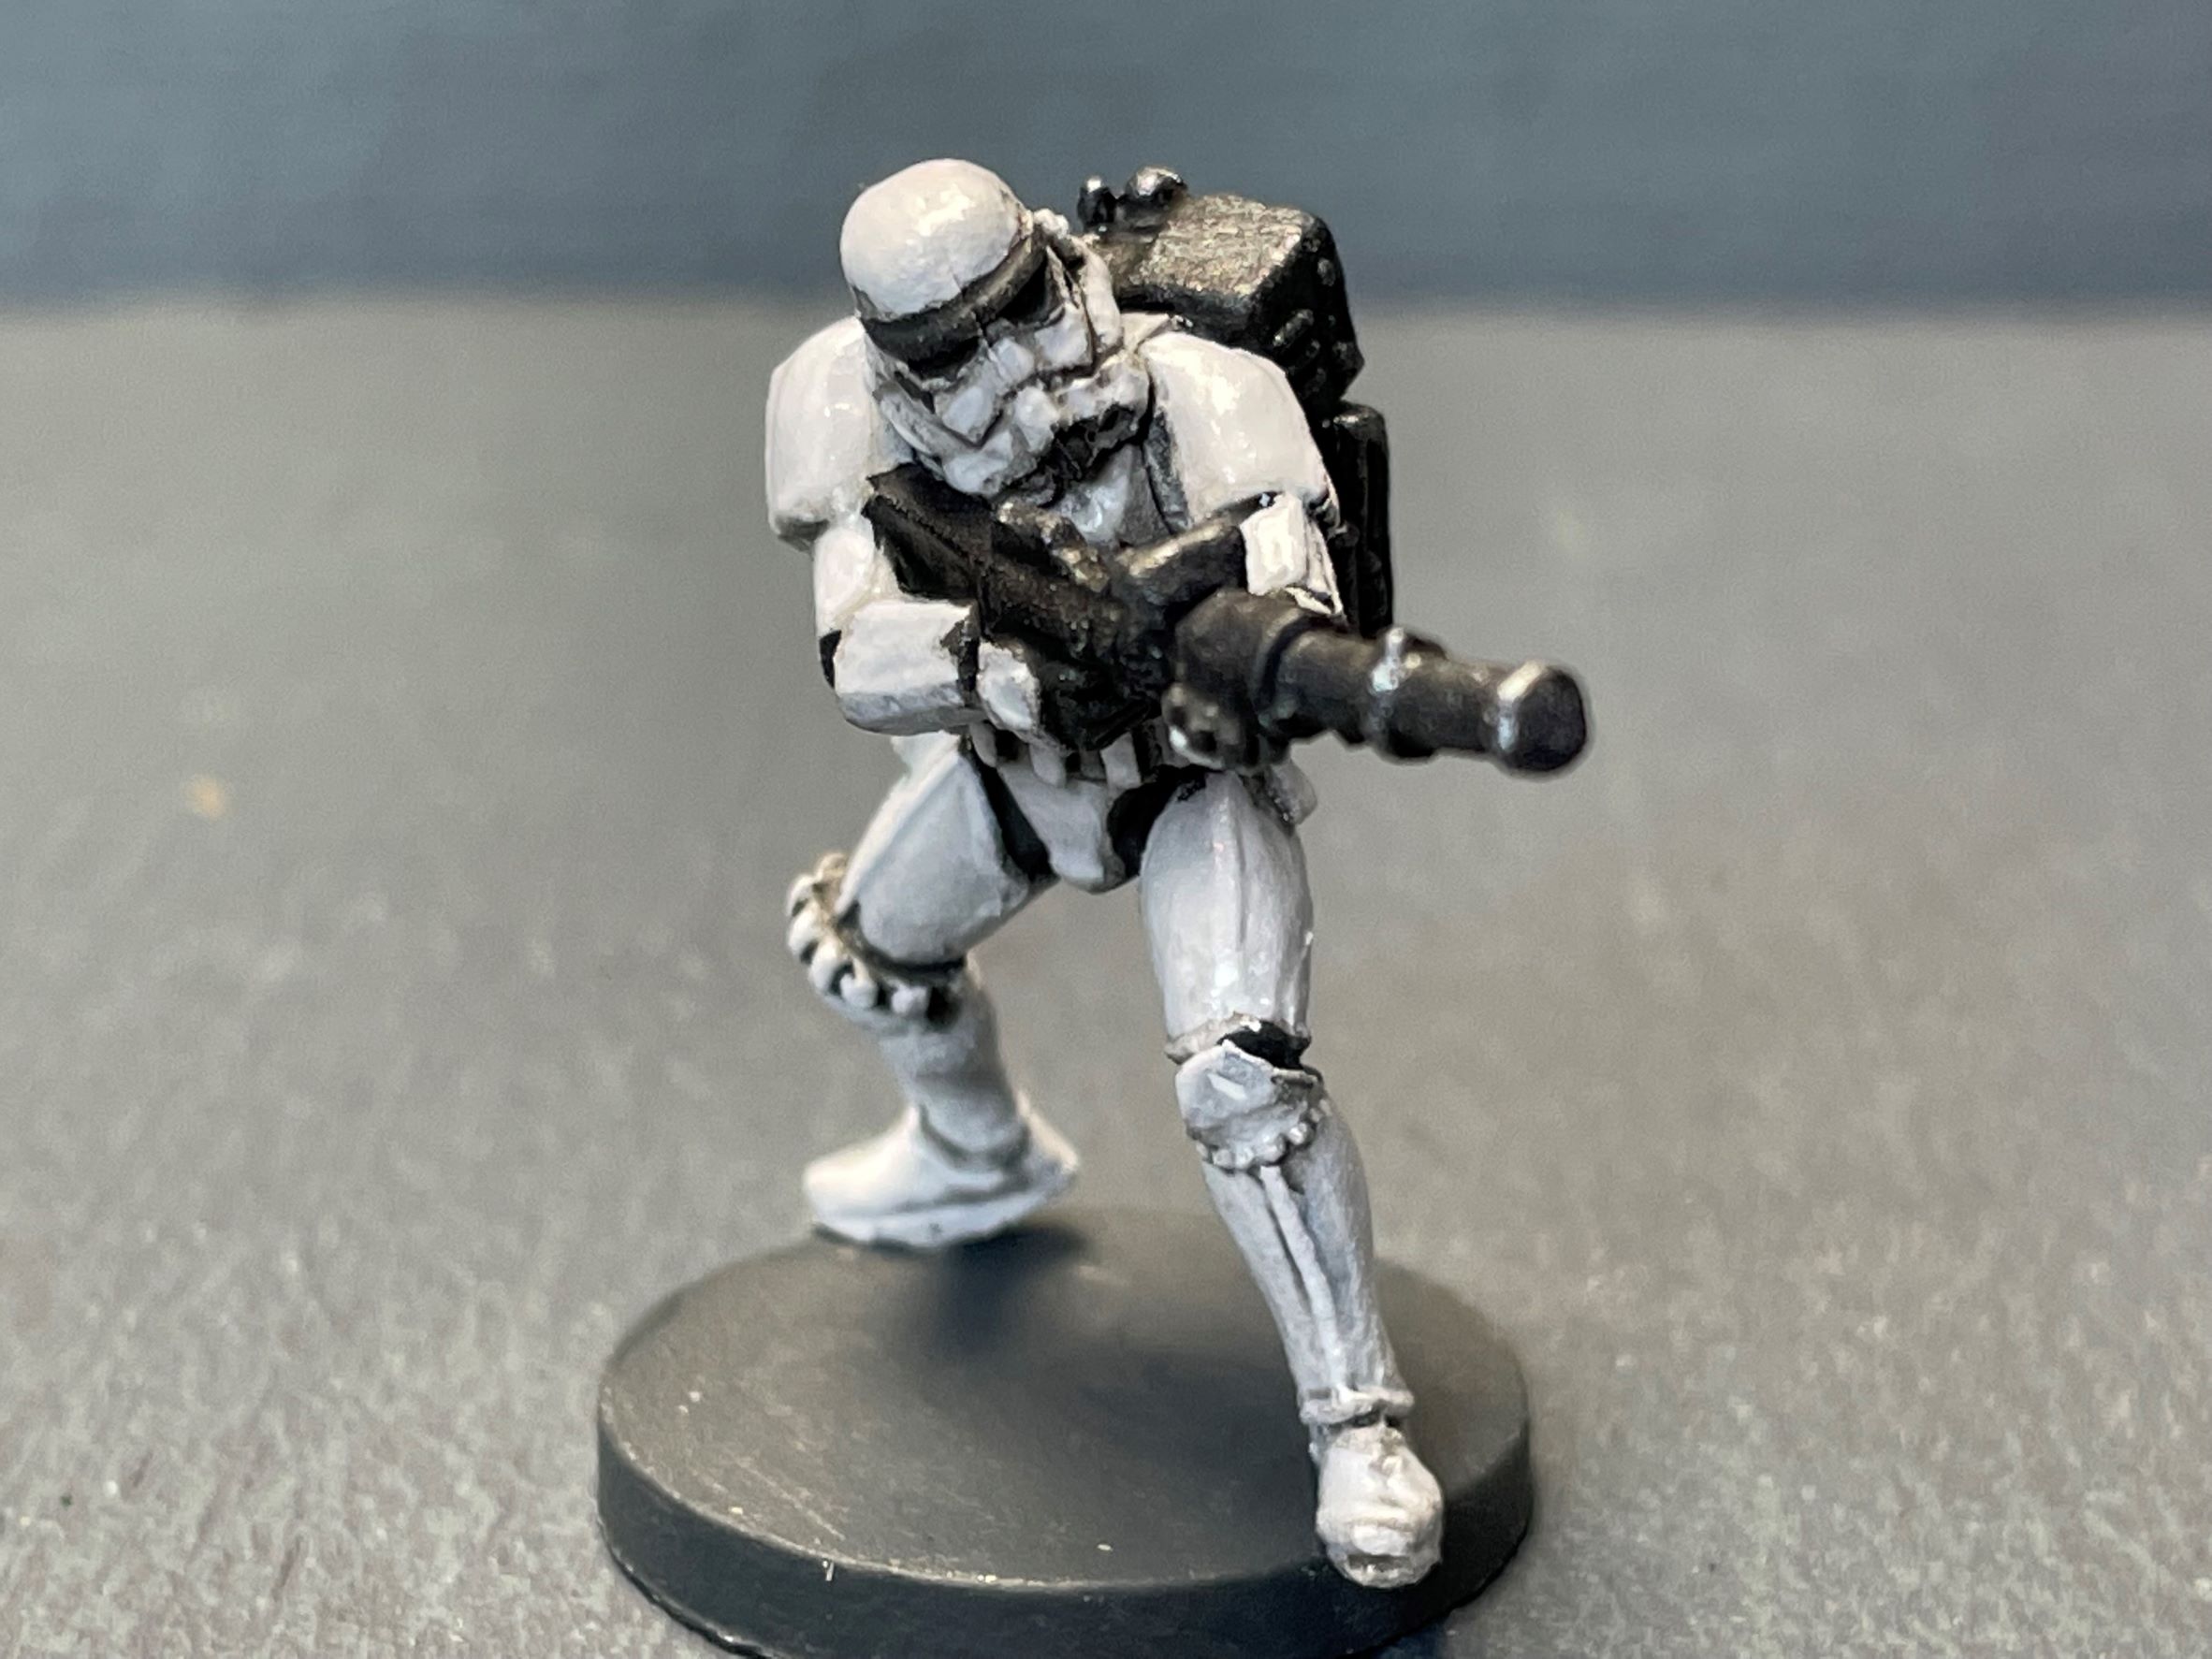  Star Wars Imperial Assault Board Game Twin Shadows